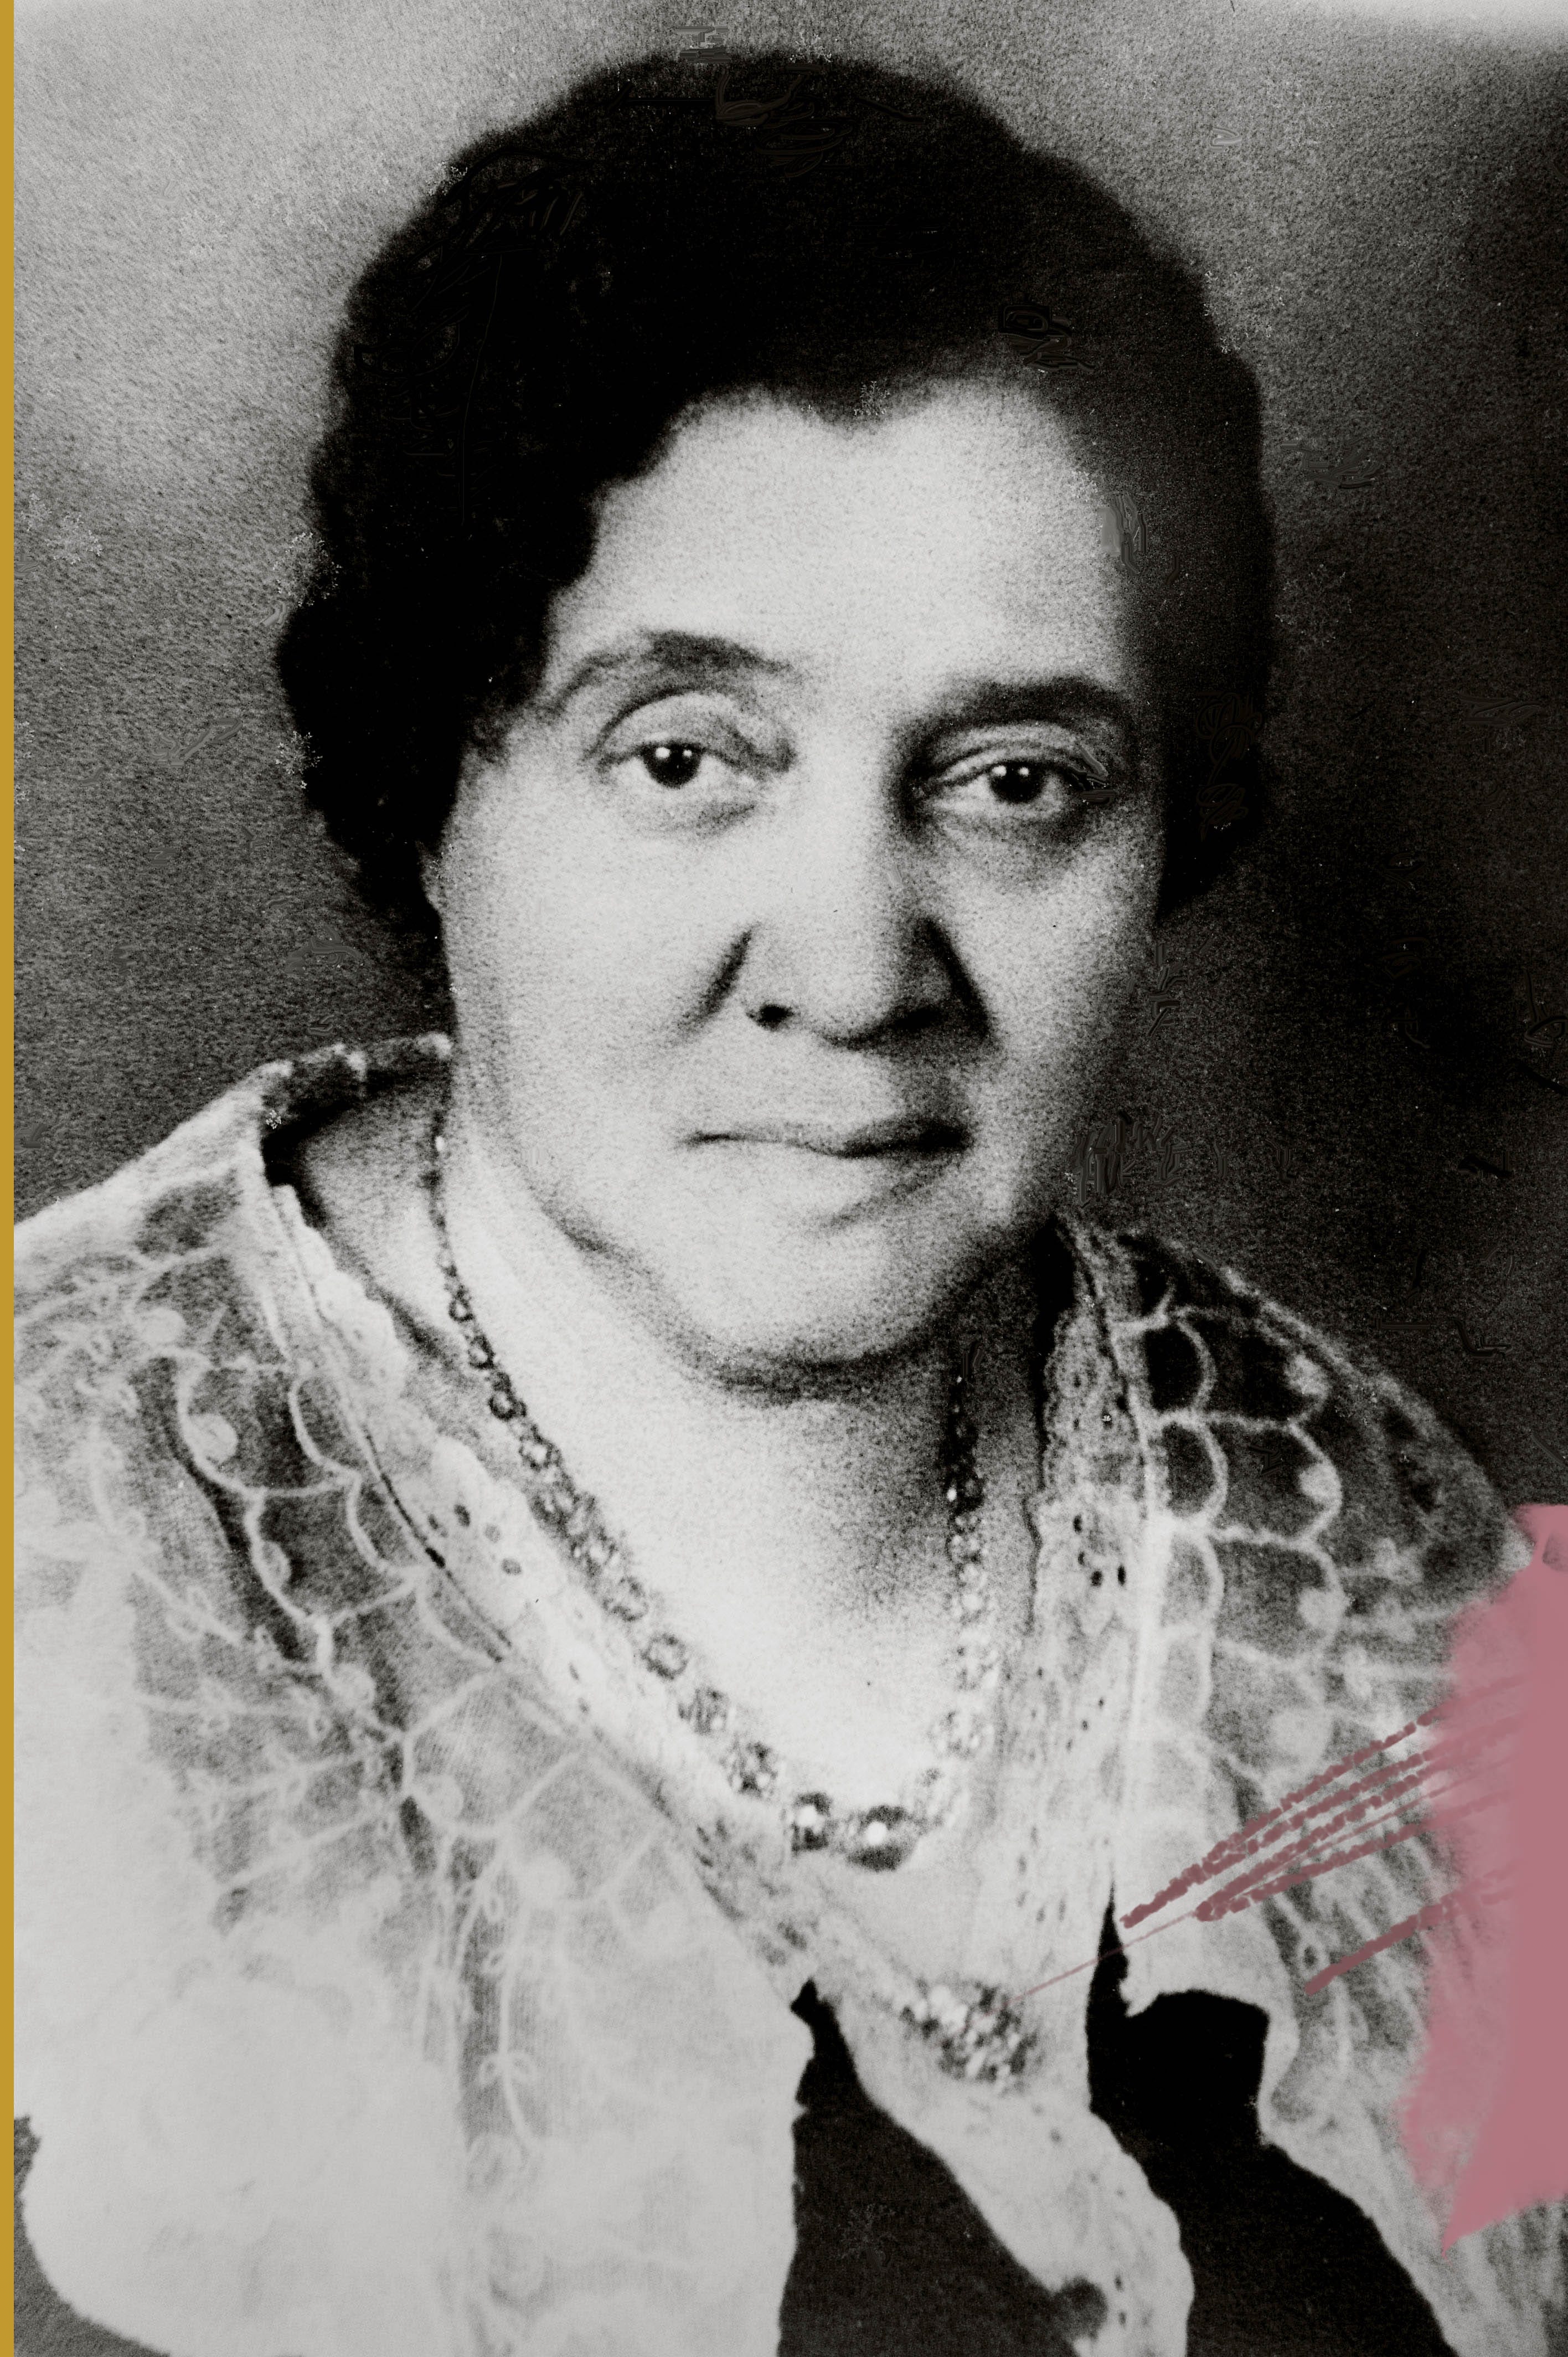 Juno Frankie Pierce was one of the leaders involved in Tennessee's ratification of the 19th Amendment in 1920.